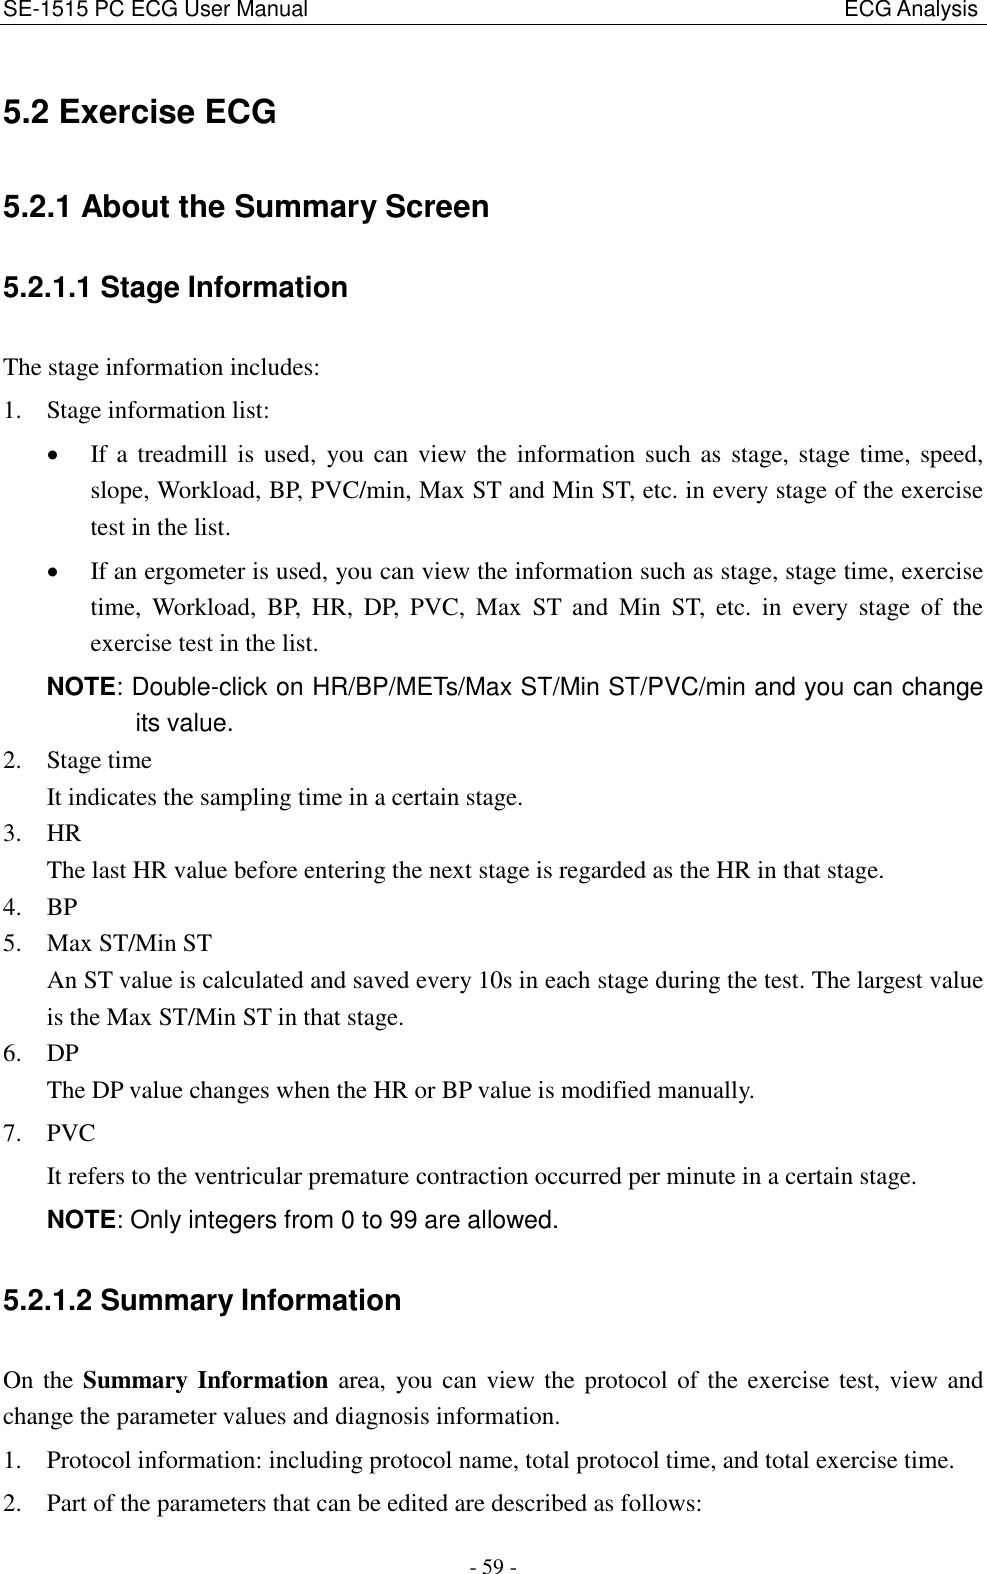 SE-1515 PC ECG User Manual                                                                                                  ECG Analysis - 59 - 5.2 Exercise ECG 5.2.1 About the Summary Screen 5.2.1.1 Stage Information The stage information includes: 1. Stage information list:    If a treadmill is used,  you can view the information  such as stage, stage time, speed, slope, Workload, BP, PVC/min, Max ST and Min ST, etc. in every stage of the exercise test in the list.  If an ergometer is used, you can view the information such as stage, stage time, exercise time,  Workload,  BP,  HR,  DP,  PVC,  Max  ST  and  Min  ST,  etc.  in  every  stage  of  the exercise test in the list. NOTE: Double-click on HR/BP/METs/Max ST/Min ST/PVC/min and you can change its value. 2. Stage time It indicates the sampling time in a certain stage. 3. HR The last HR value before entering the next stage is regarded as the HR in that stage. 4. BP 5. Max ST/Min ST An ST value is calculated and saved every 10s in each stage during the test. The largest value is the Max ST/Min ST in that stage. 6. DP The DP value changes when the HR or BP value is modified manually. 7. PVC It refers to the ventricular premature contraction occurred per minute in a certain stage. NOTE: Only integers from 0 to 99 are allowed. 5.2.1.2 Summary Information On the Summary Information area, you can view the protocol of the exercise test, view and change the parameter values and diagnosis information. 1. Protocol information: including protocol name, total protocol time, and total exercise time. 2. Part of the parameters that can be edited are described as follows: 